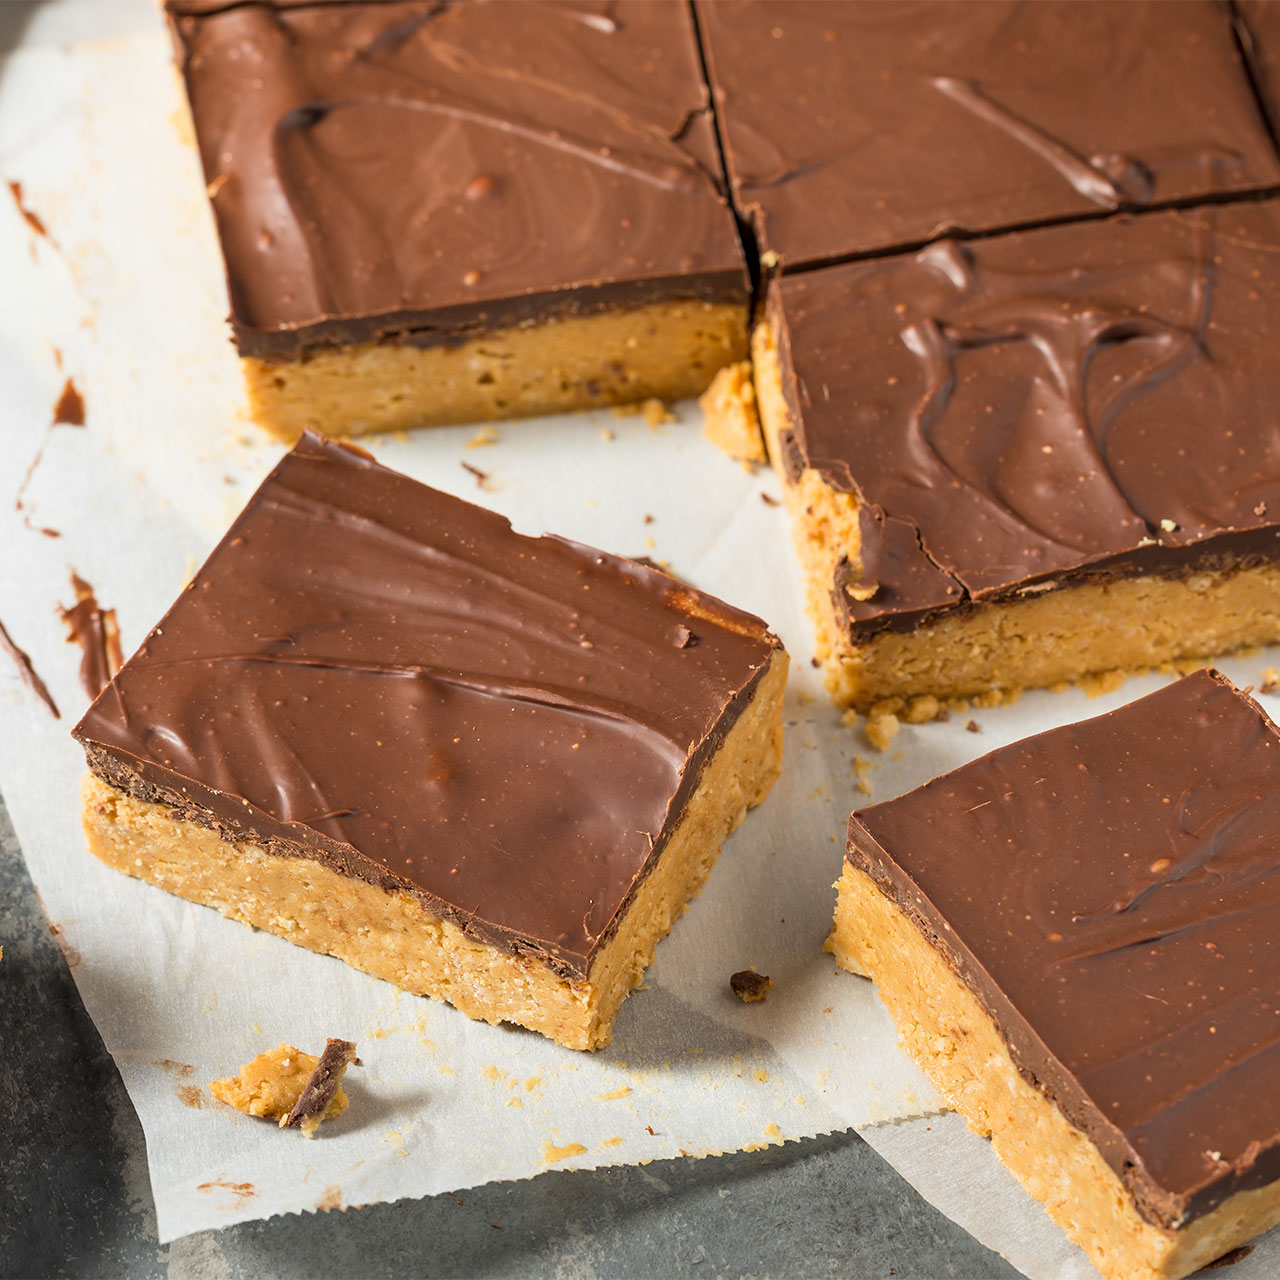 Make These High-Protein Chocolate-Peanut Bars for Summer Weight Loss